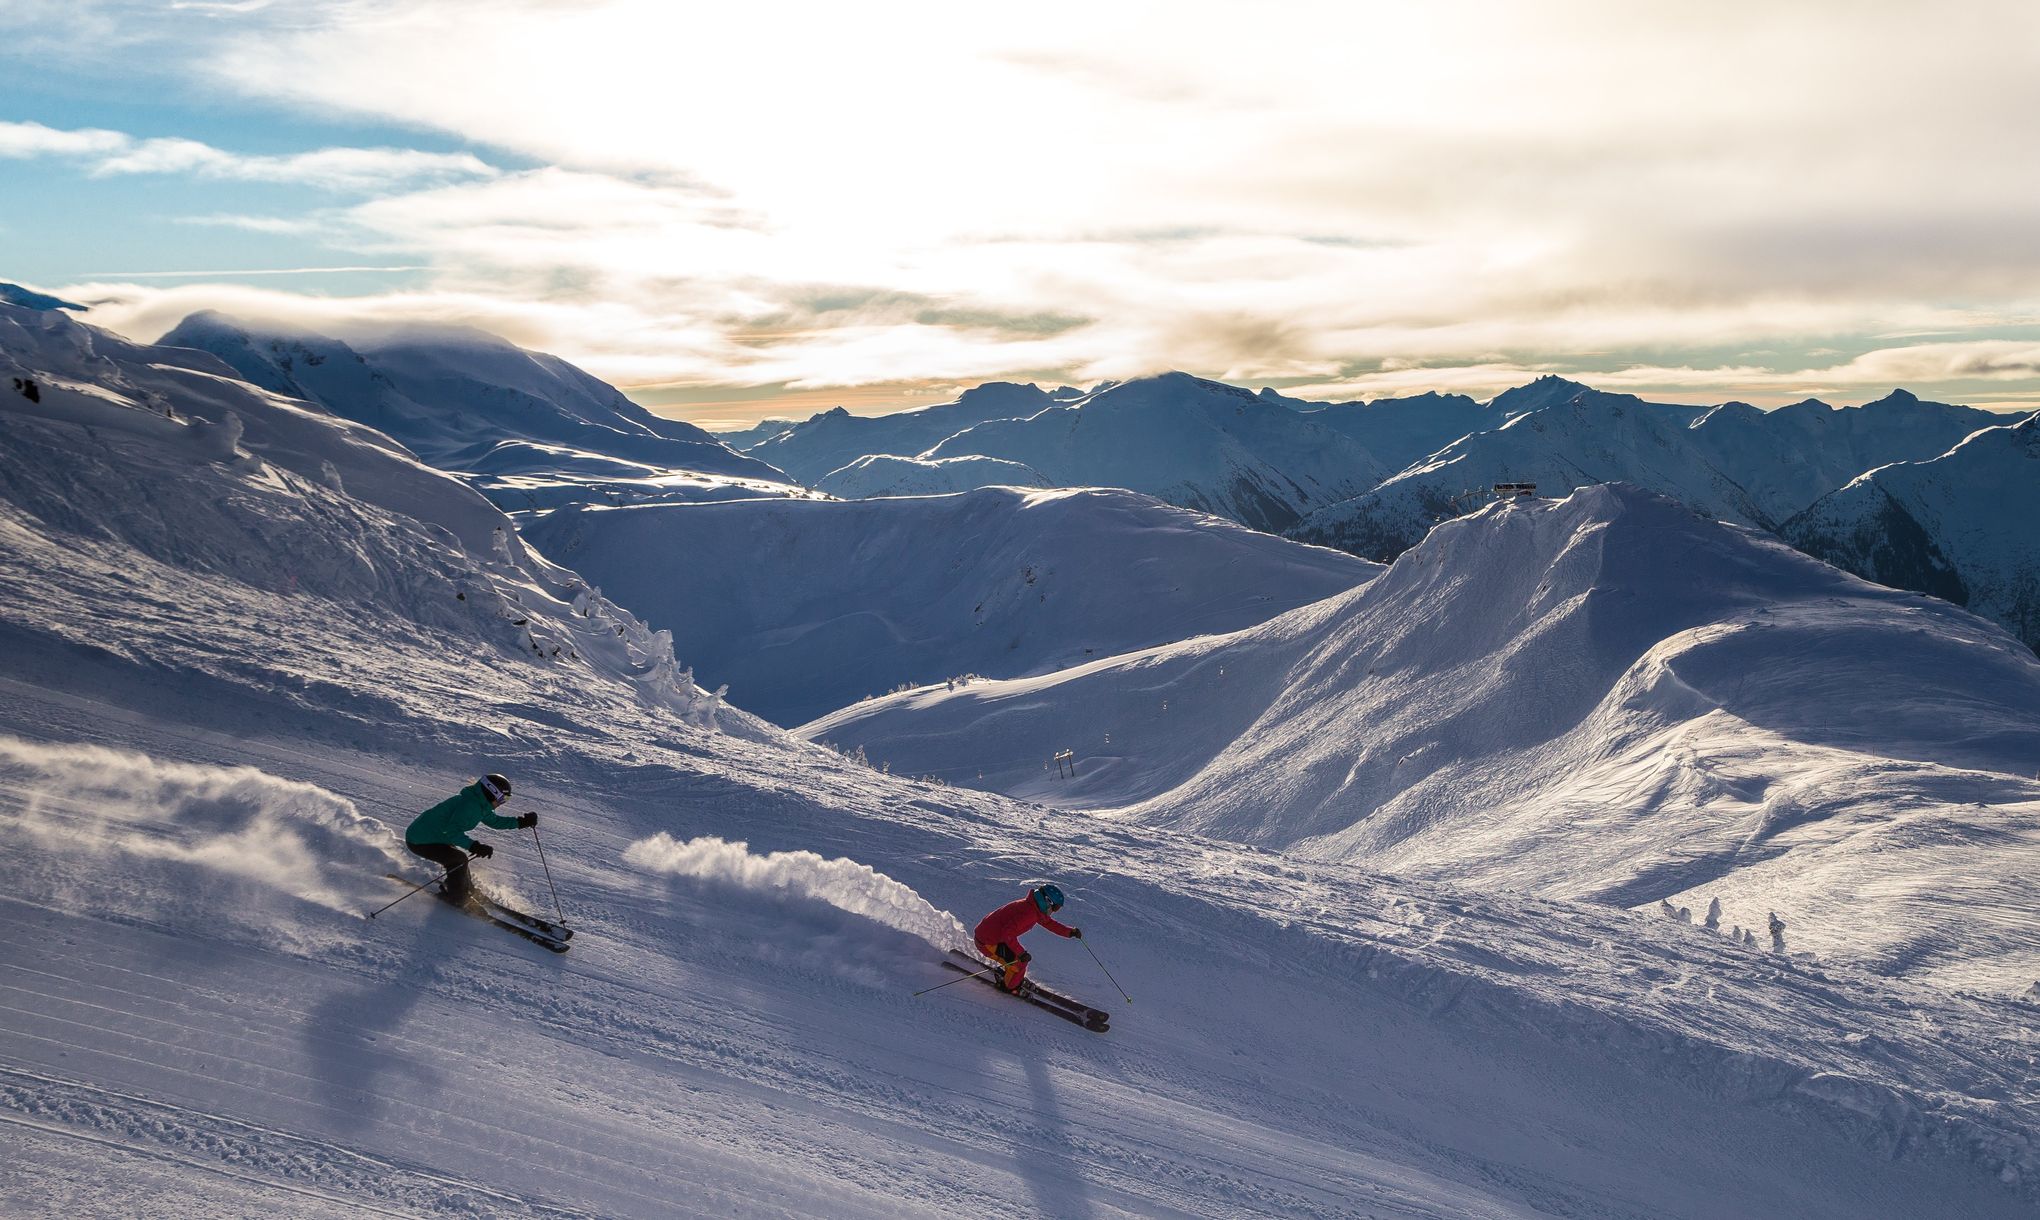 How to Plan the Ultimate Ski Vacation to Whistler, British Columbia